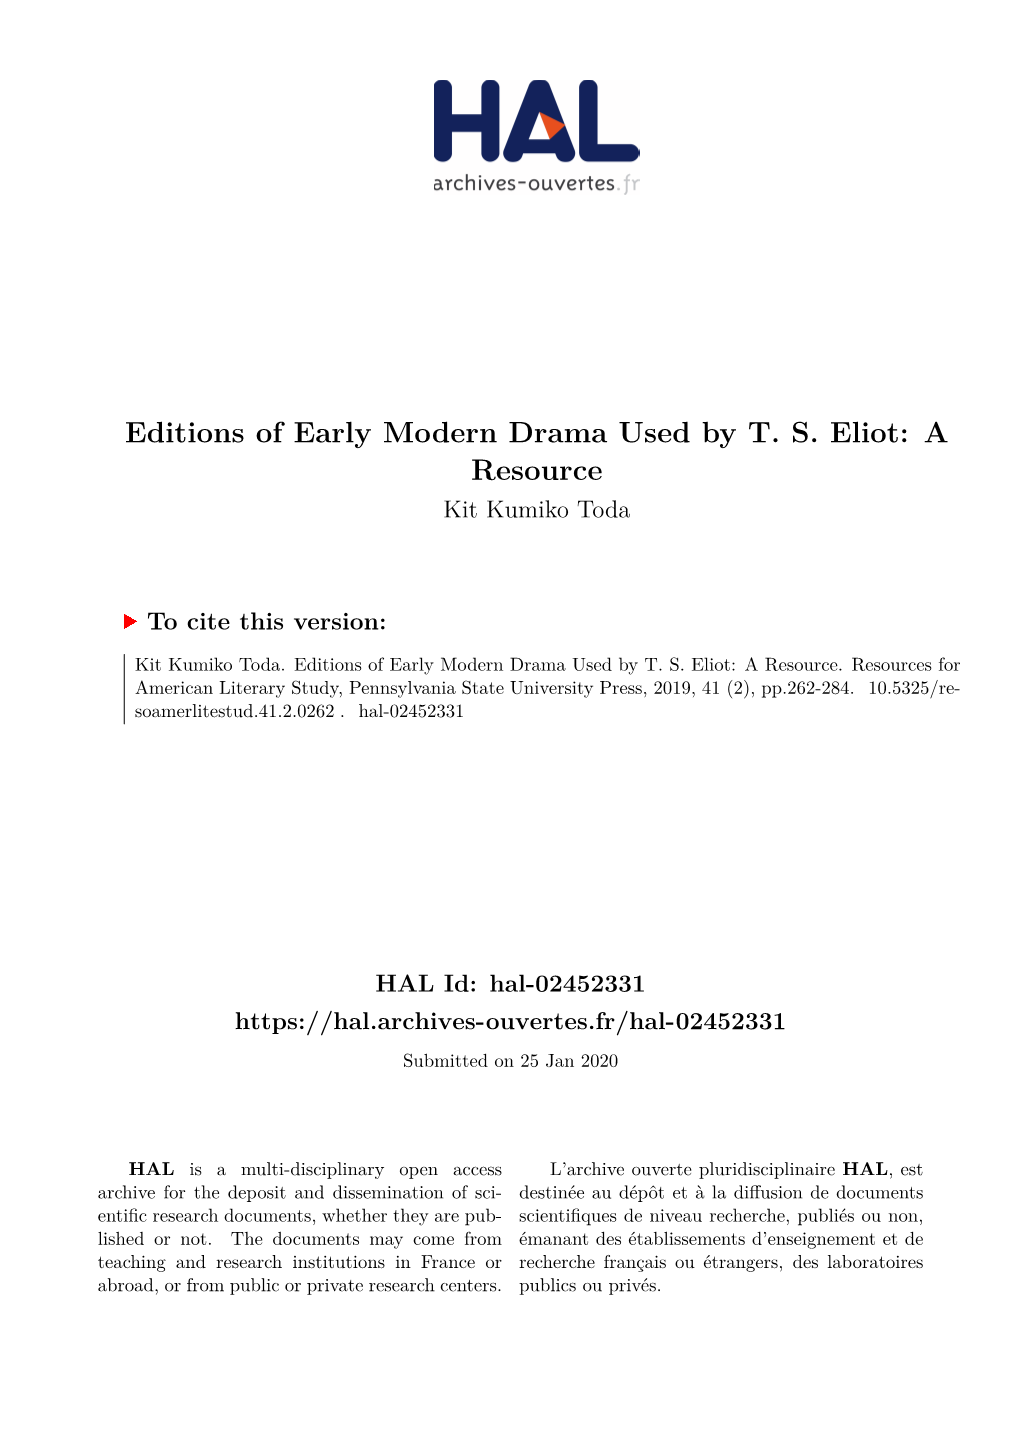 Editions of Early Modern Drama Used by TS Eliot